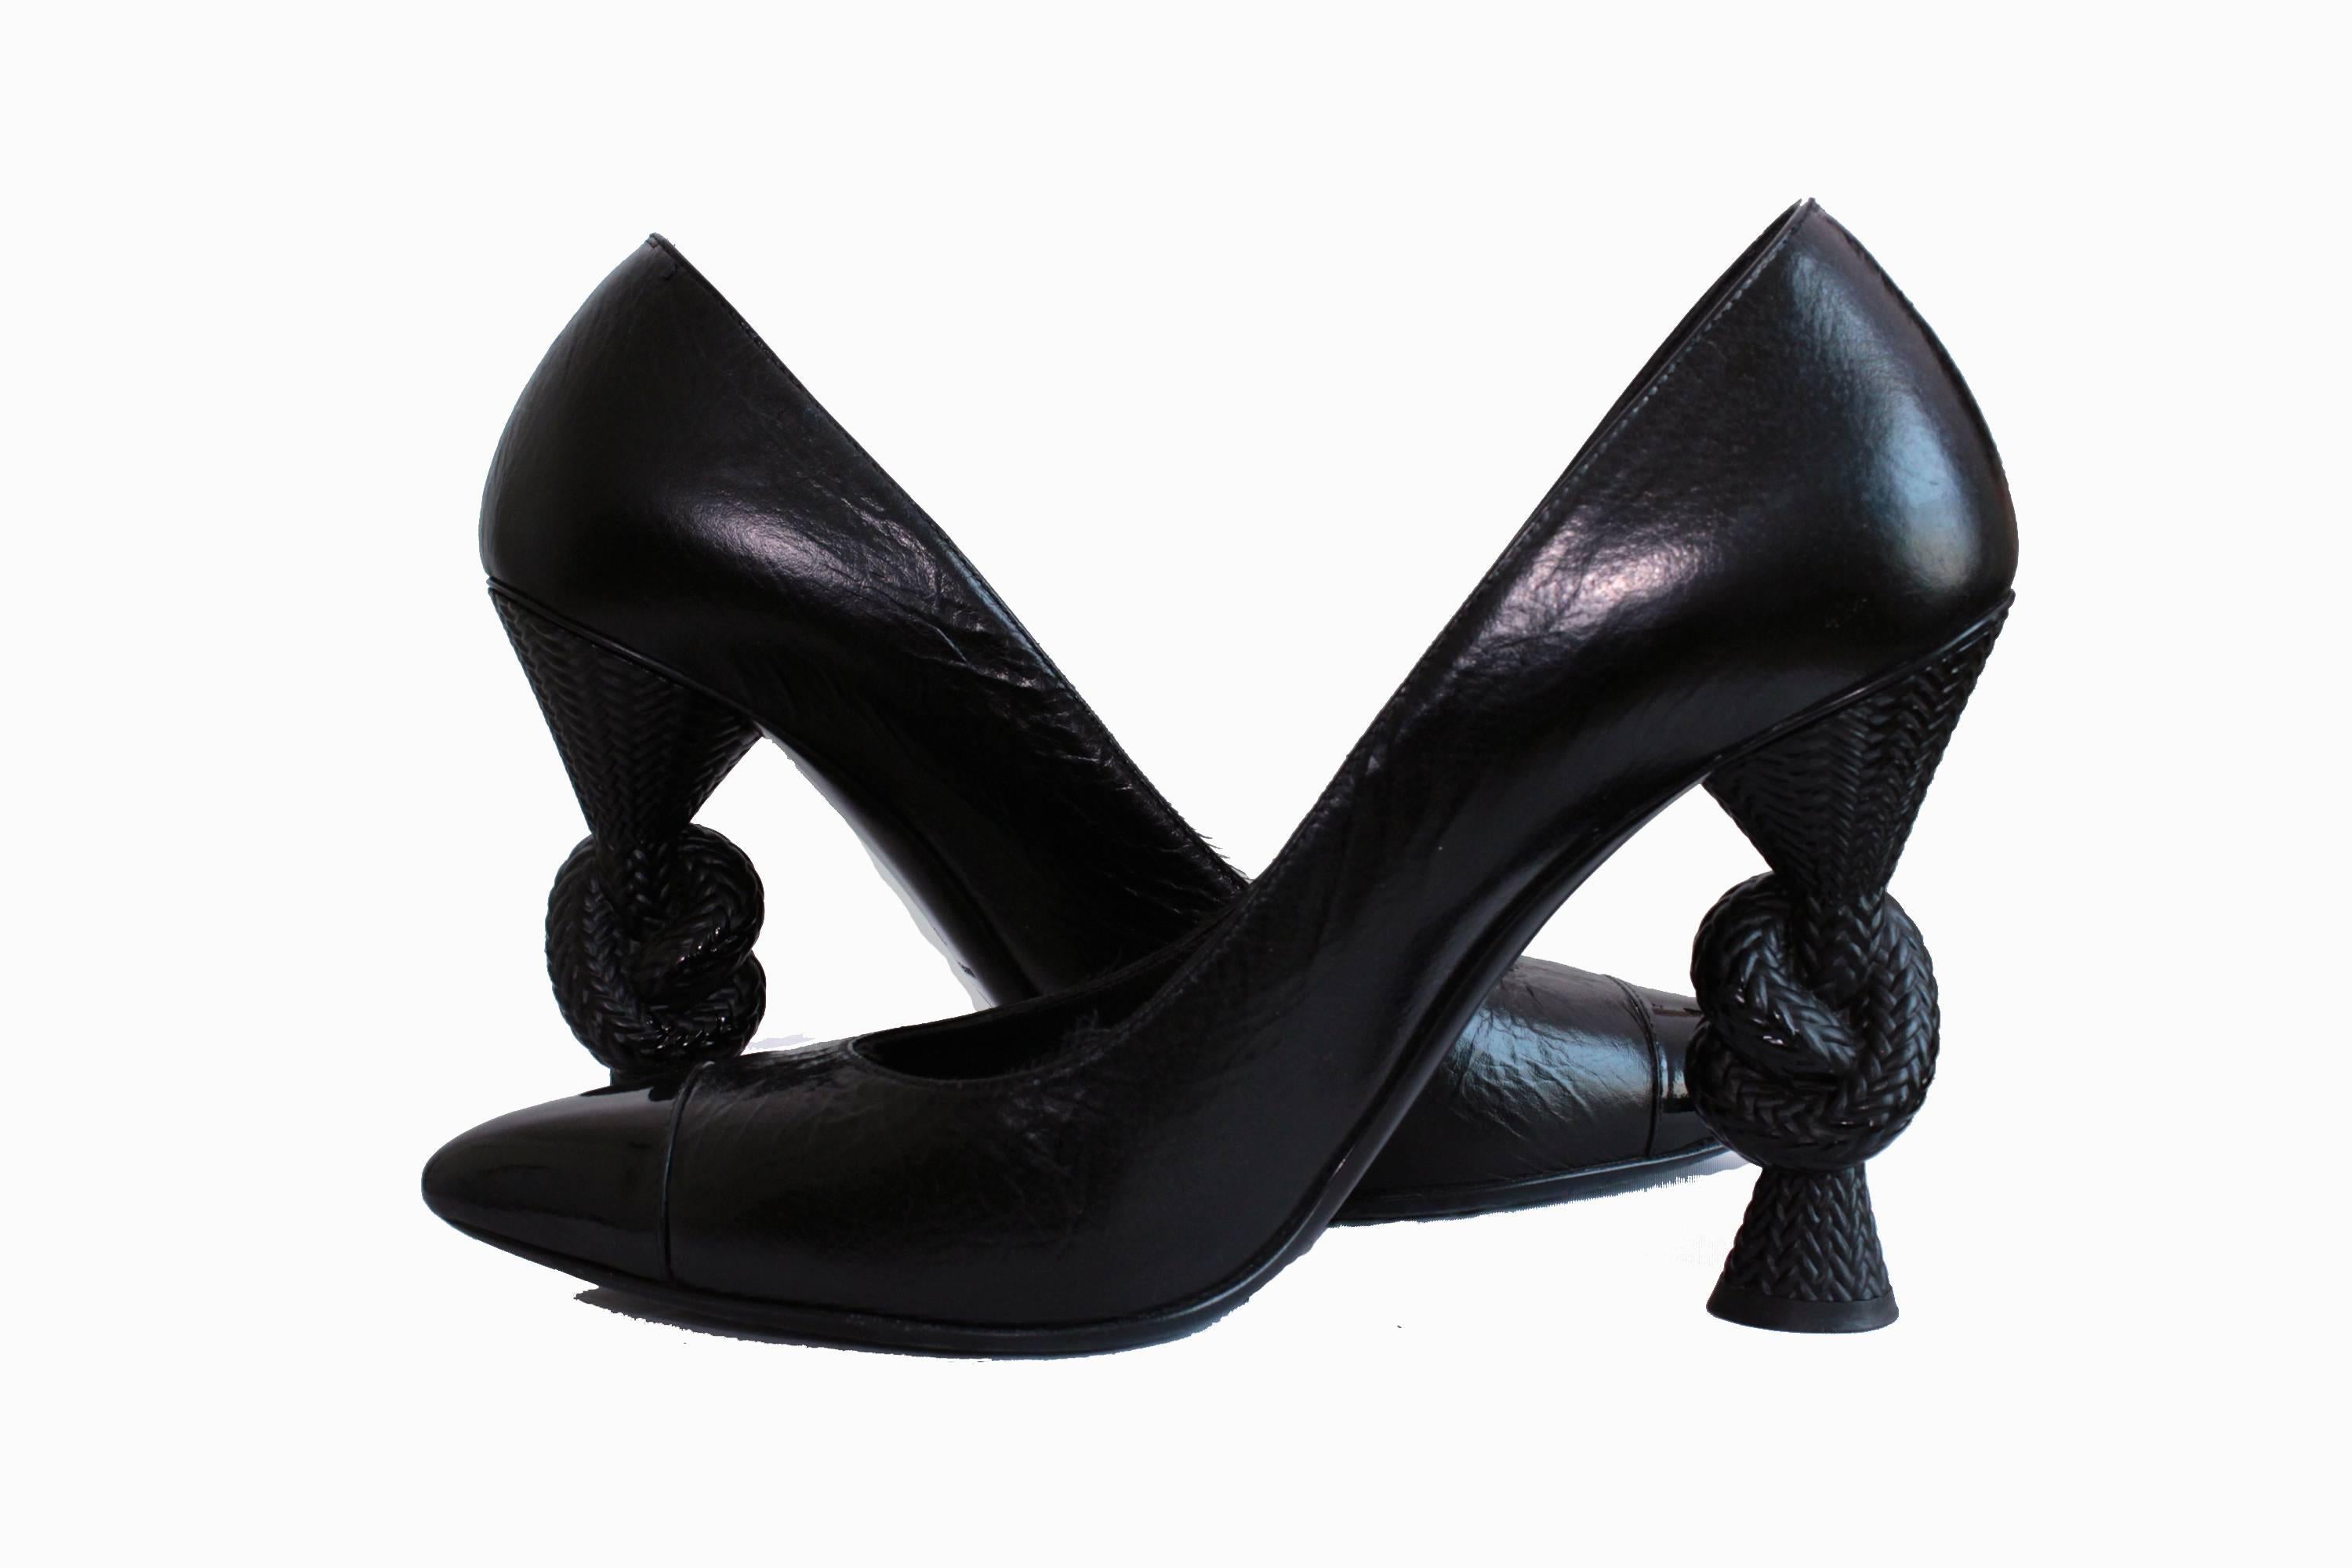 Rare Chanel Knot Heel Shoes Black Leather and Patent 2014 Resort Sz 38.5 2